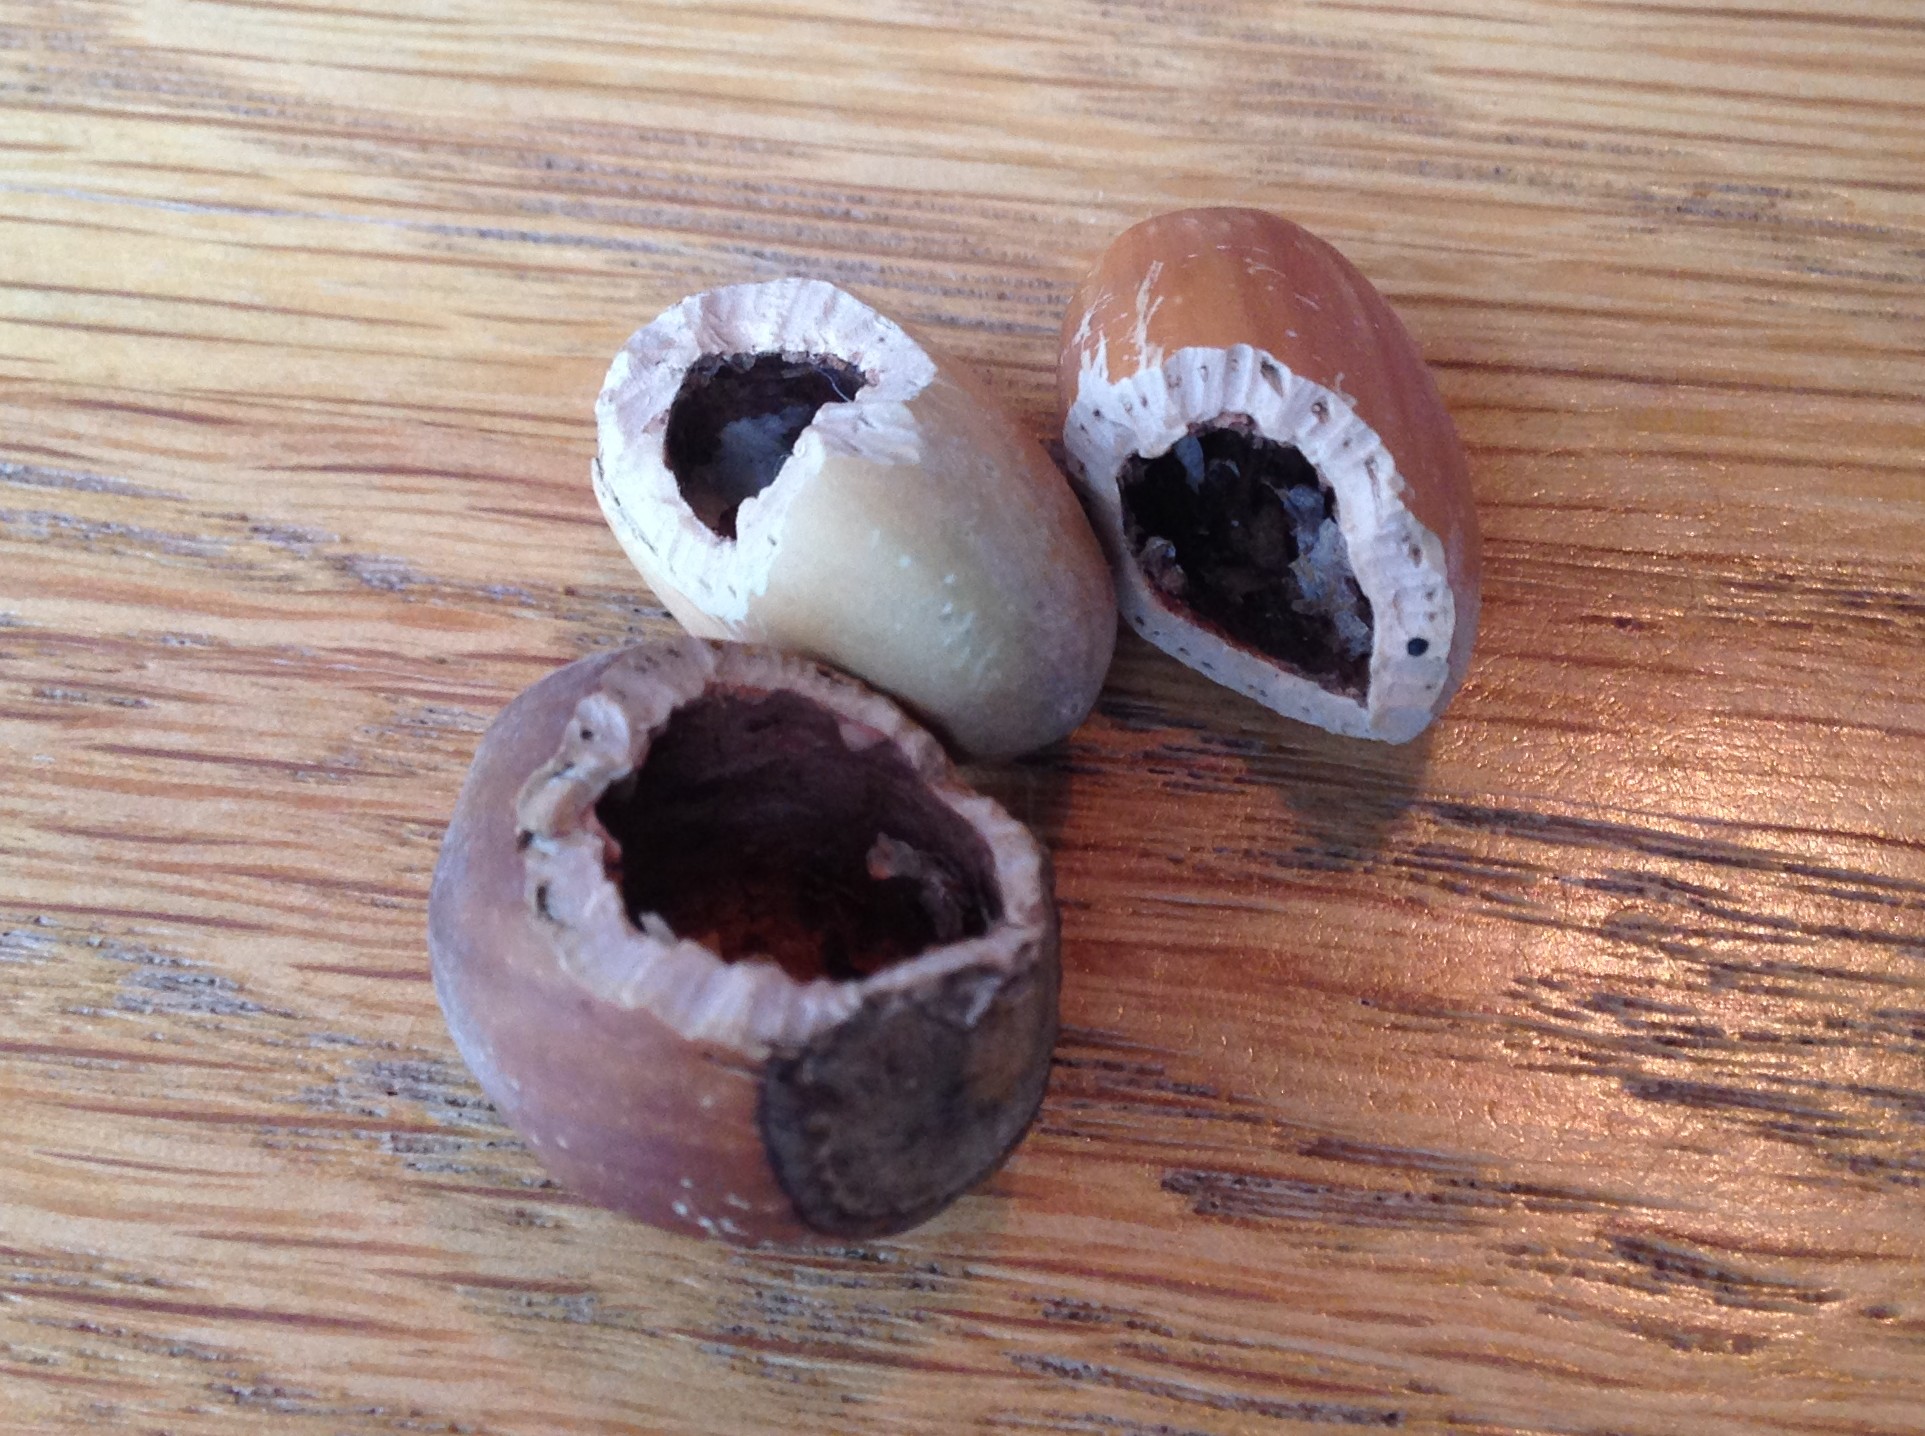 The pattern of gnaw-marks in these hazelnut shells are consist with those of a wood mouse.